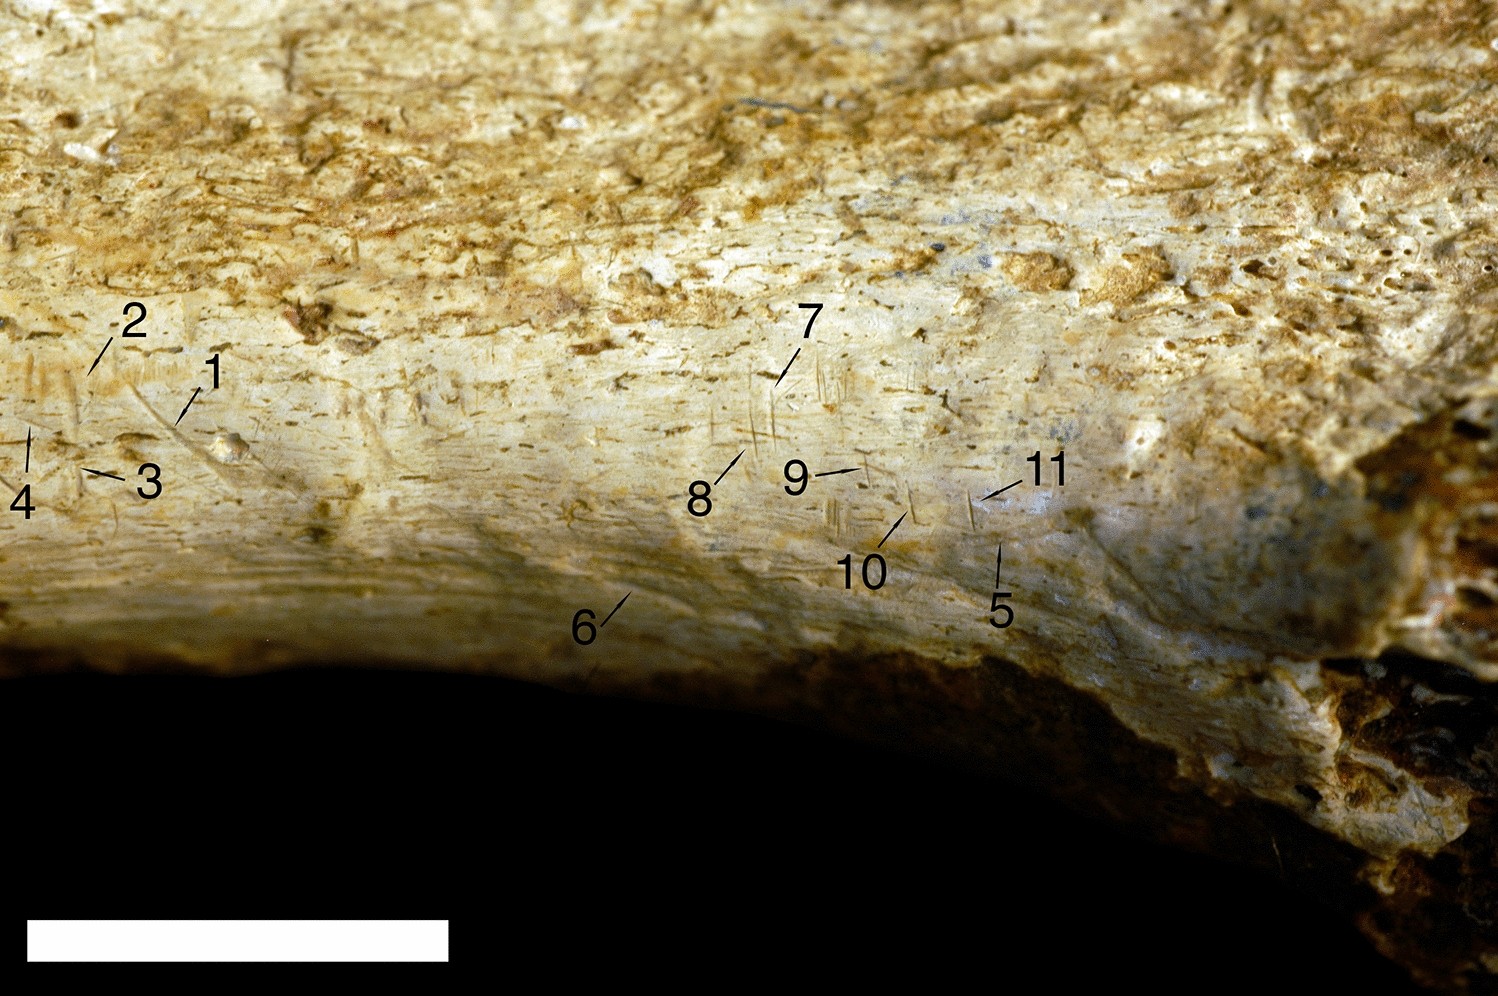 Nine marks identified as cut marks (mark numbers 1–4 and 7–11) and two identified as tooth marks (mark numbers 5 and 6) based on comparison with 898 known bone surface modifications using a quadratic discriminant analysis of the micromorphological measurements collected in the study. Scale = 1 cm.